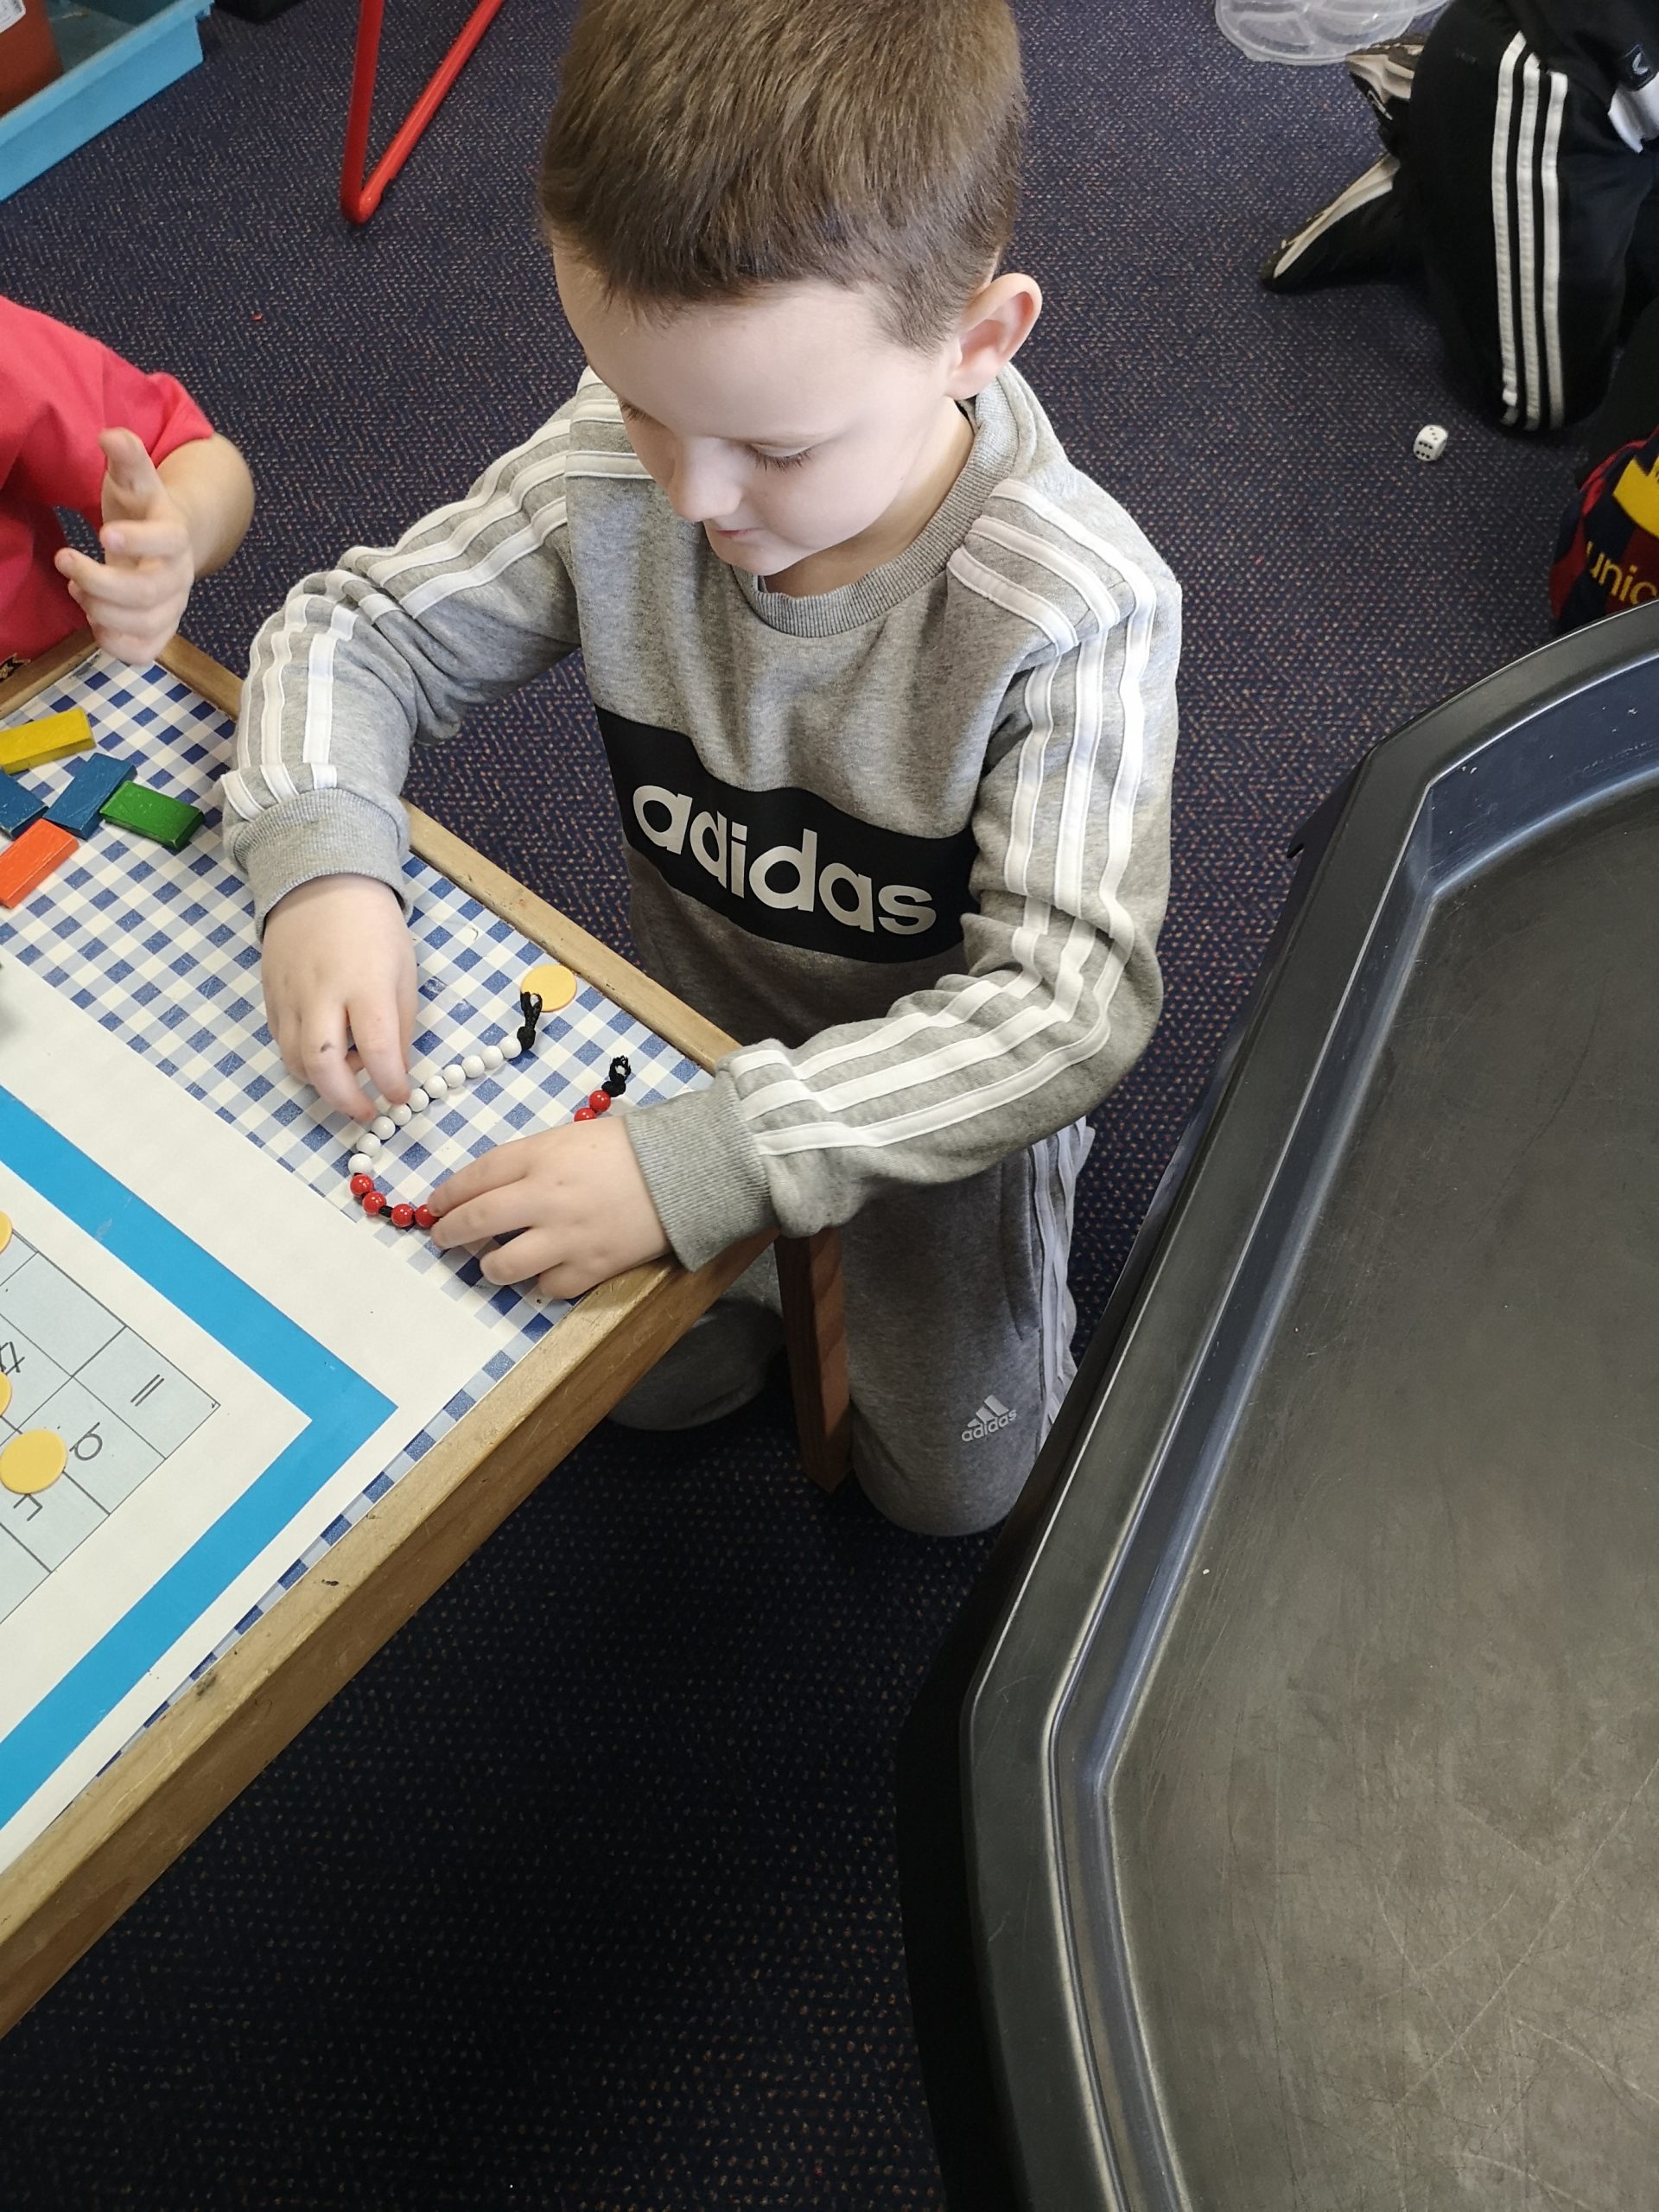 Year 1 children taking part in Number Day activities